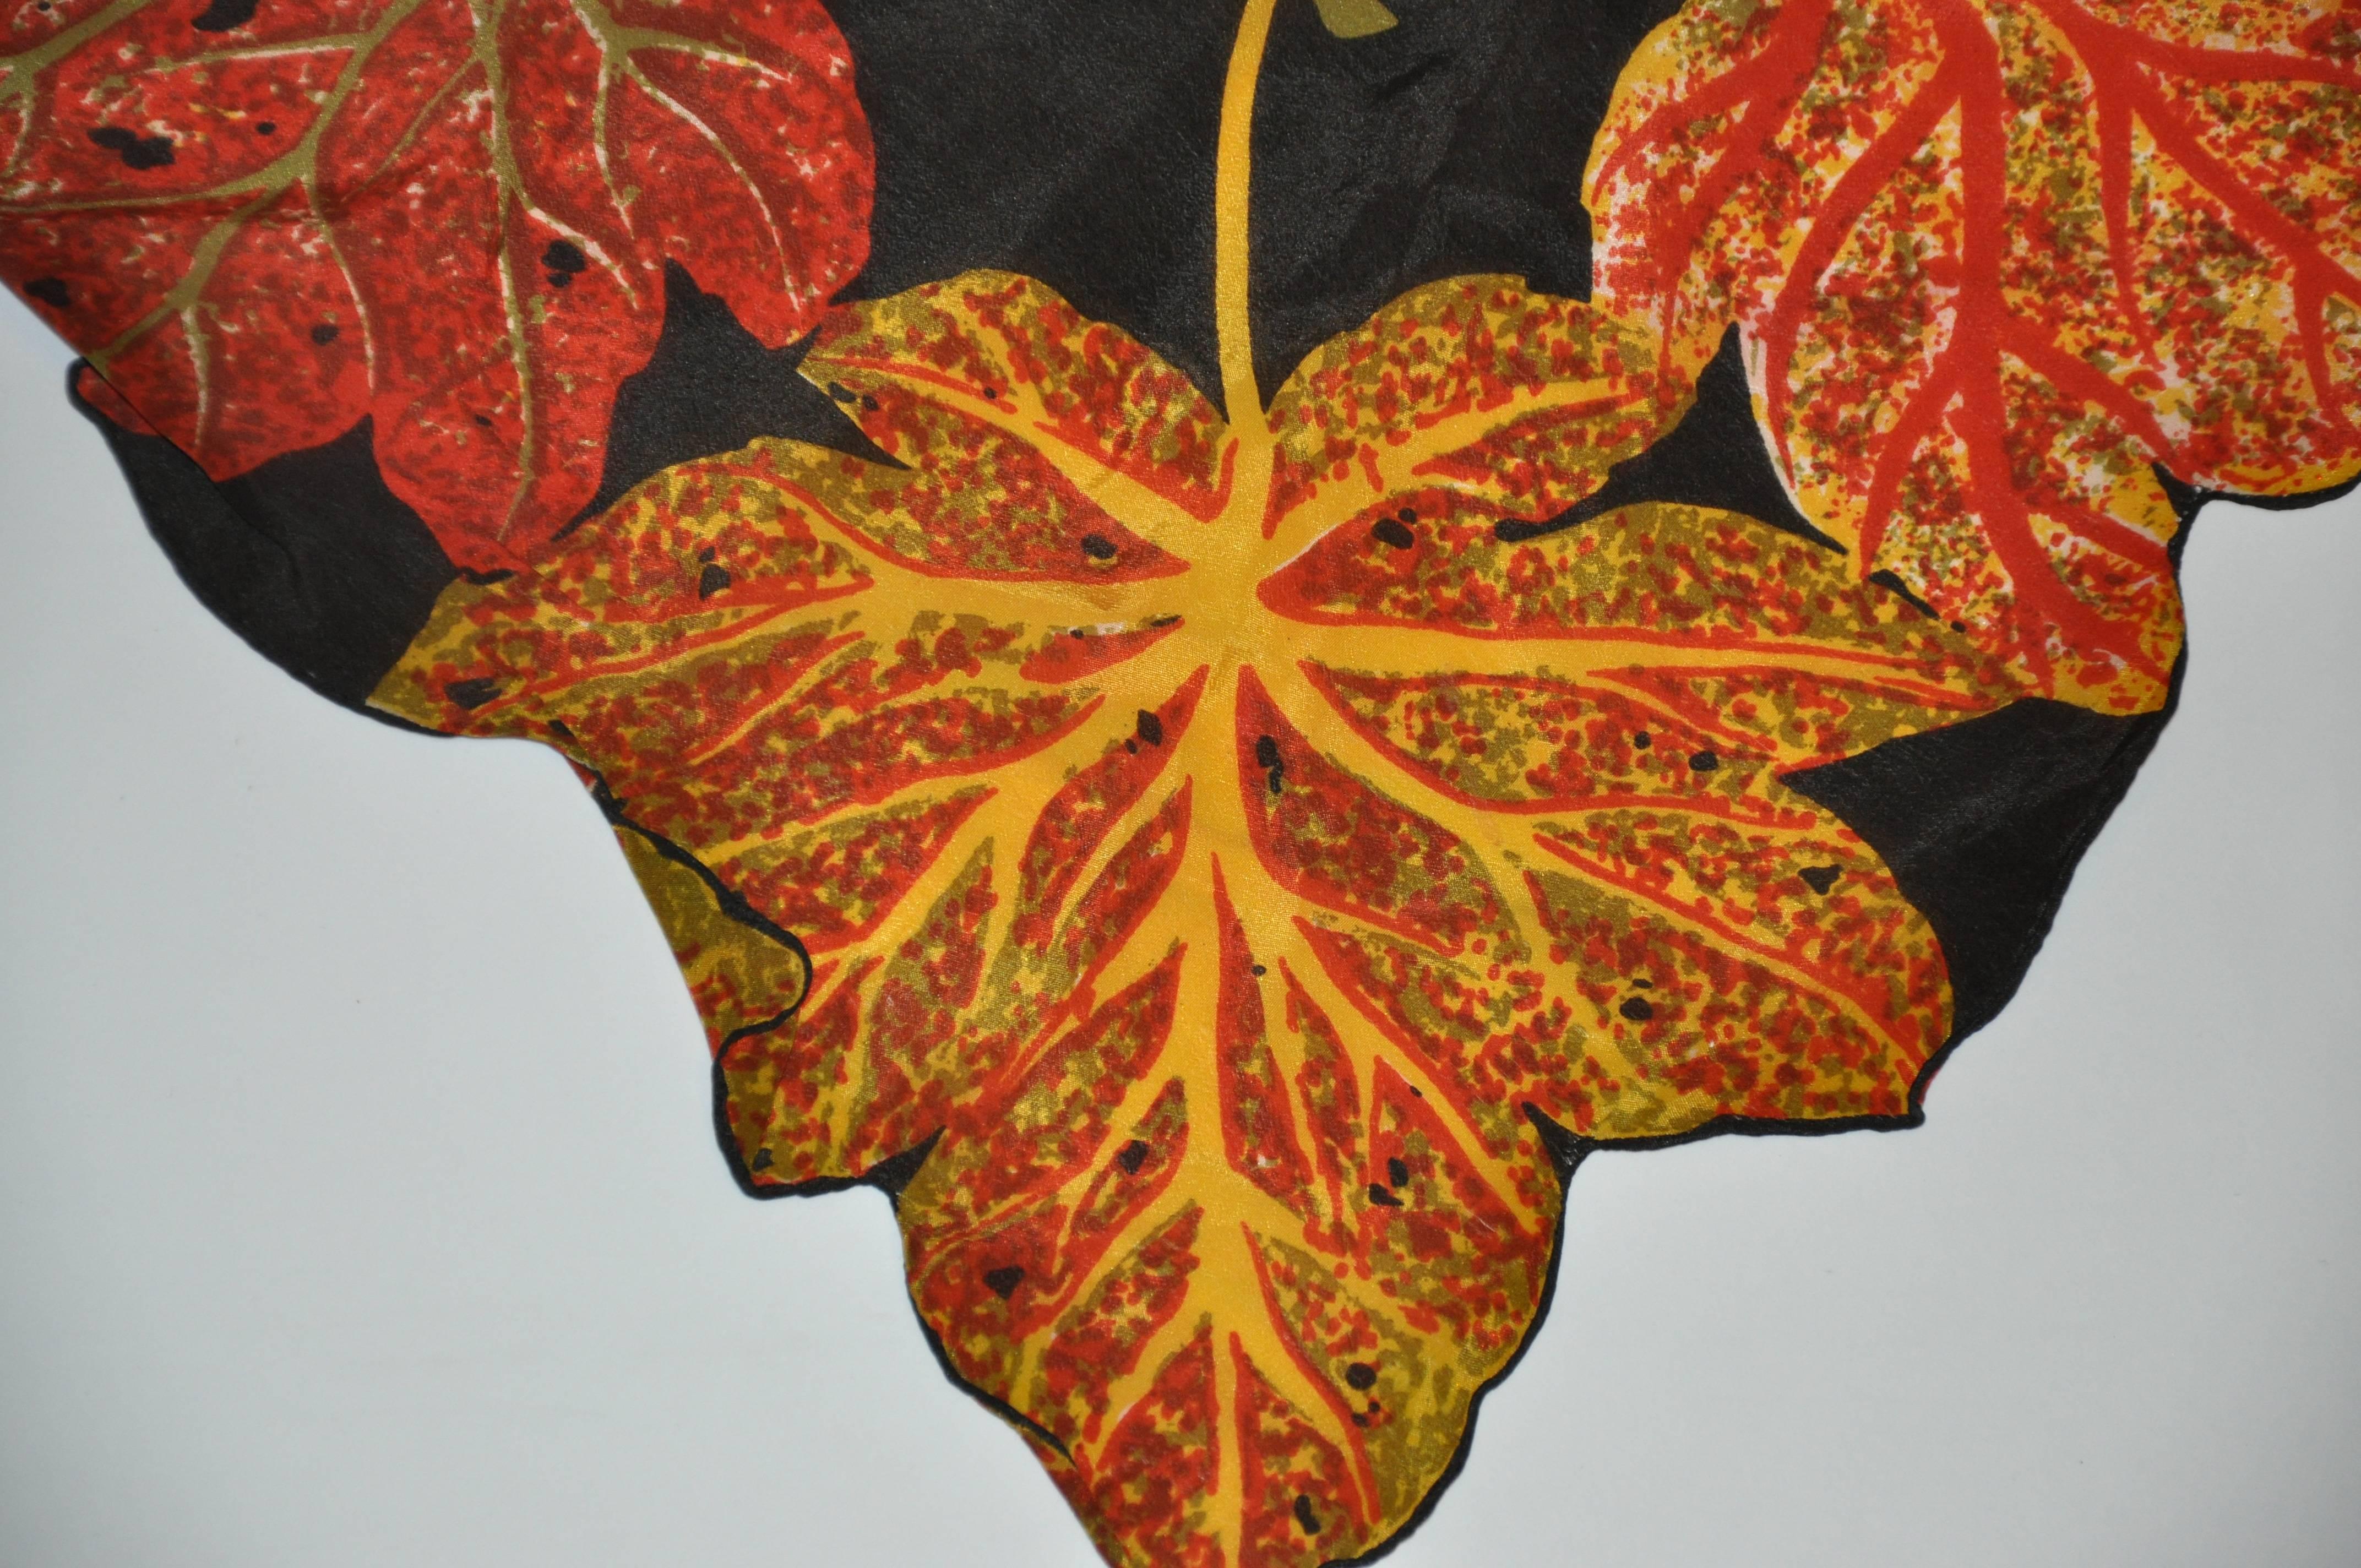 This rare wonderful double-panel "Autumn Leaves" silk scarf measures 17" x 40". Made in Japan.